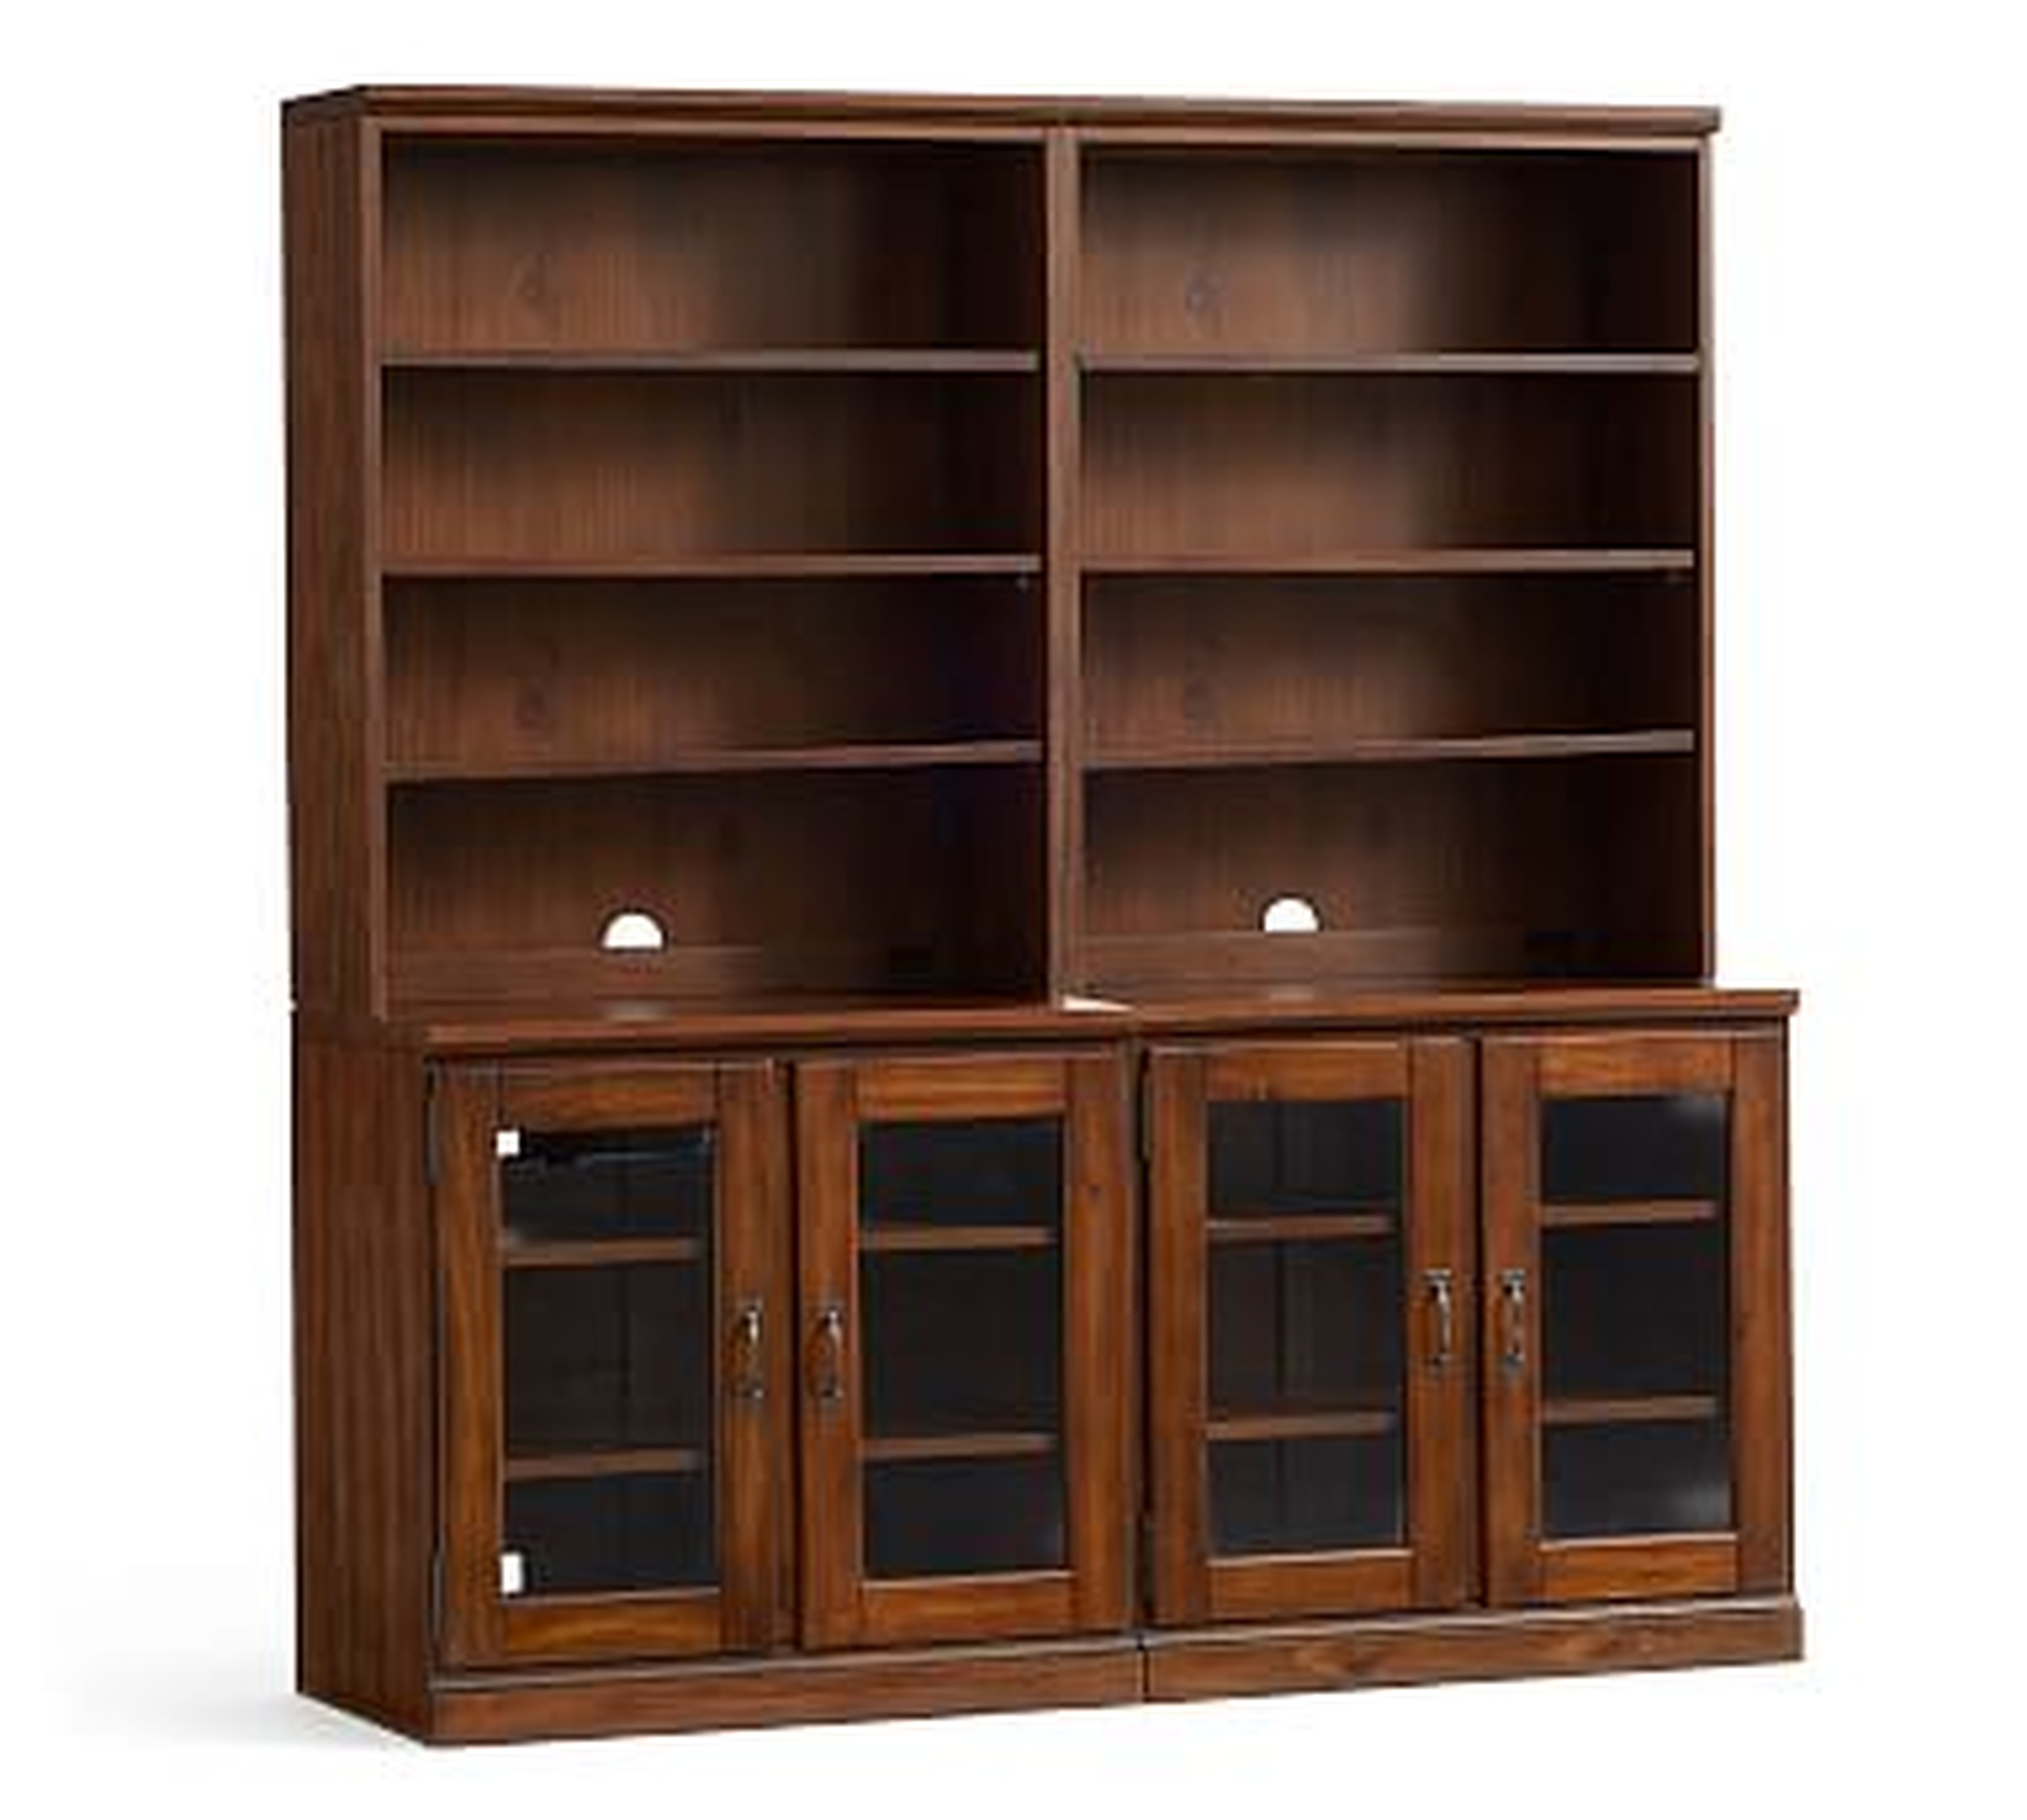 Printer's Bookcase with Glass Cabinets, Tuscan Chestnut, 64"L x 69.5"H - Pottery Barn